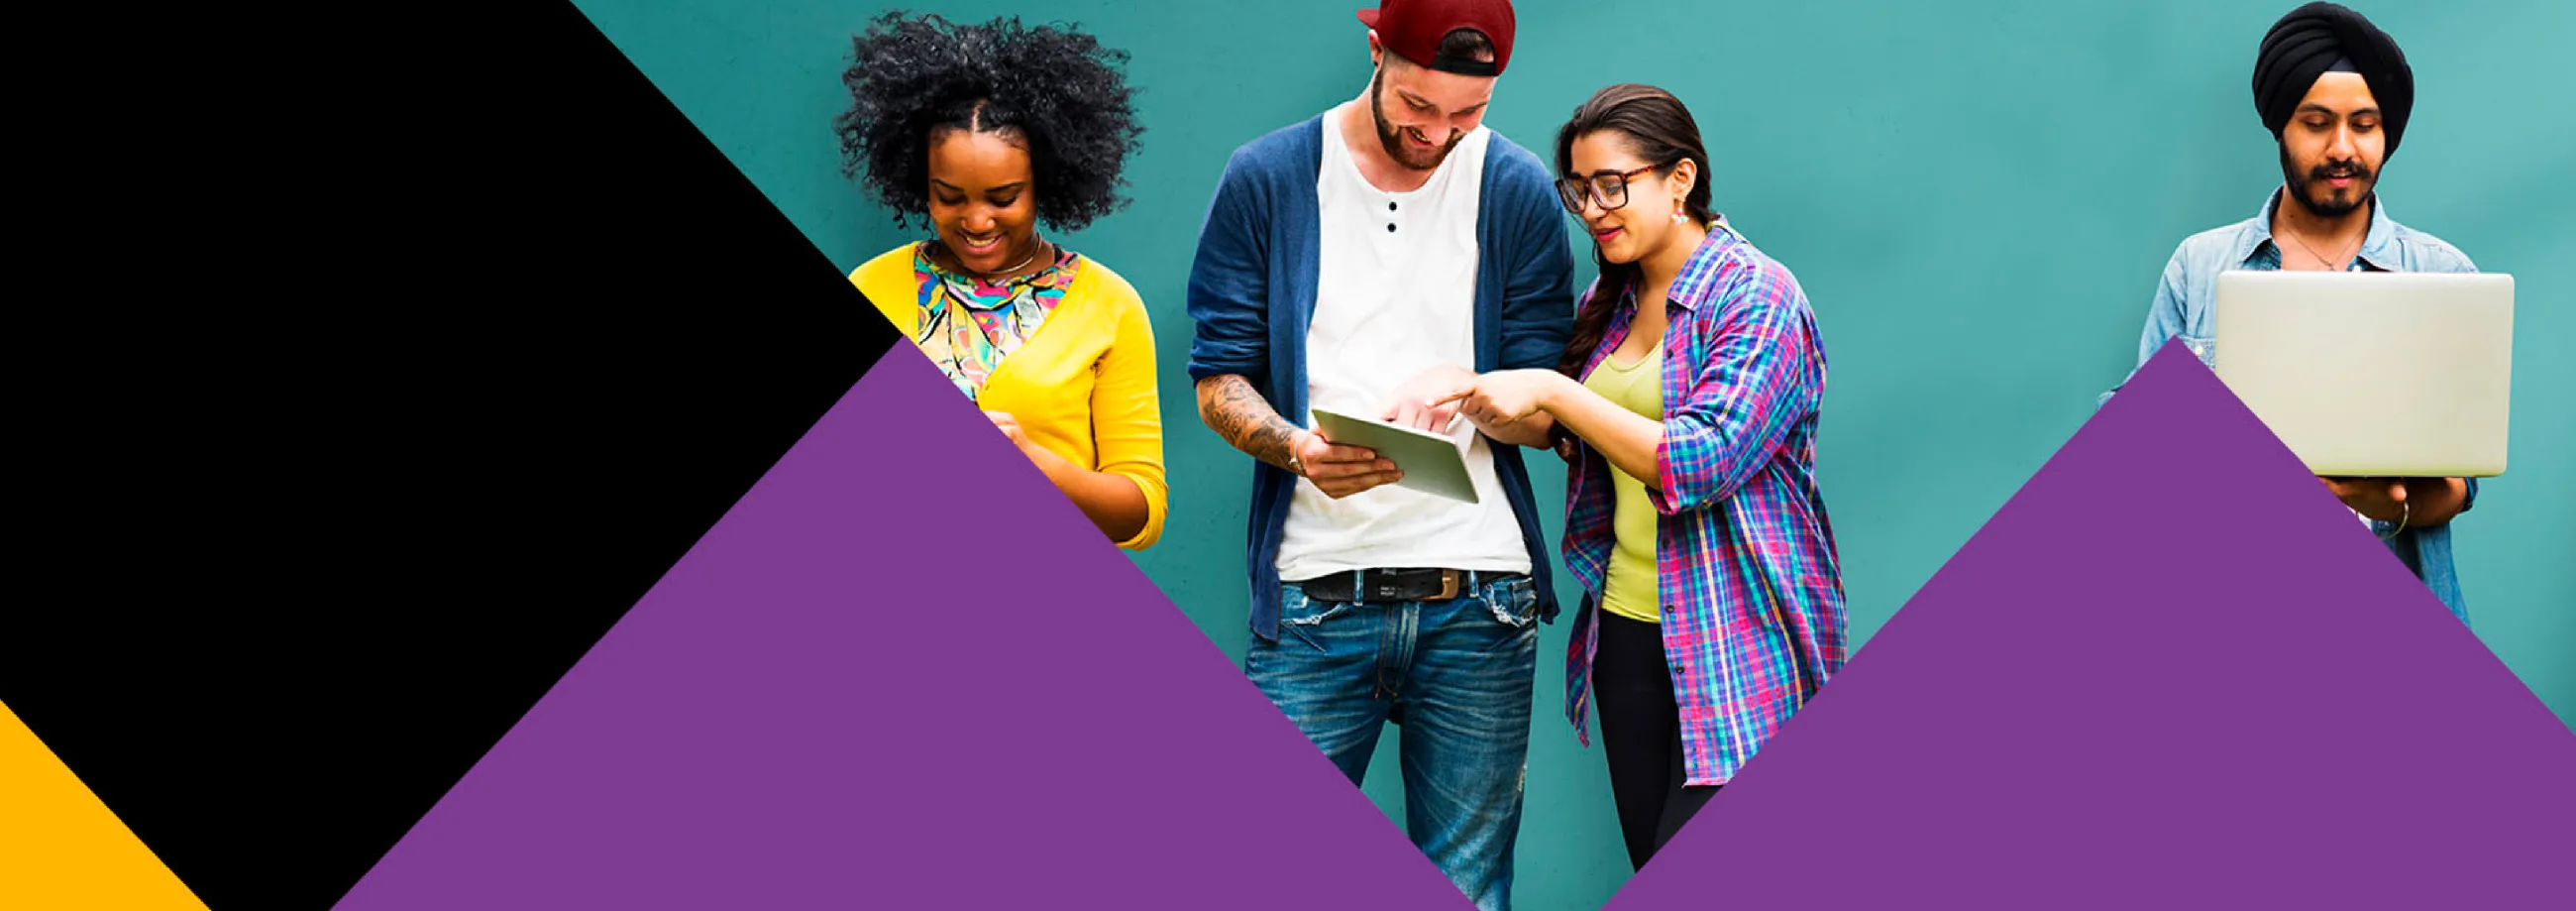 Warrington and Vale Royal College brand imagery showing ethnically diverse students alongside a bold, colourful graphic device